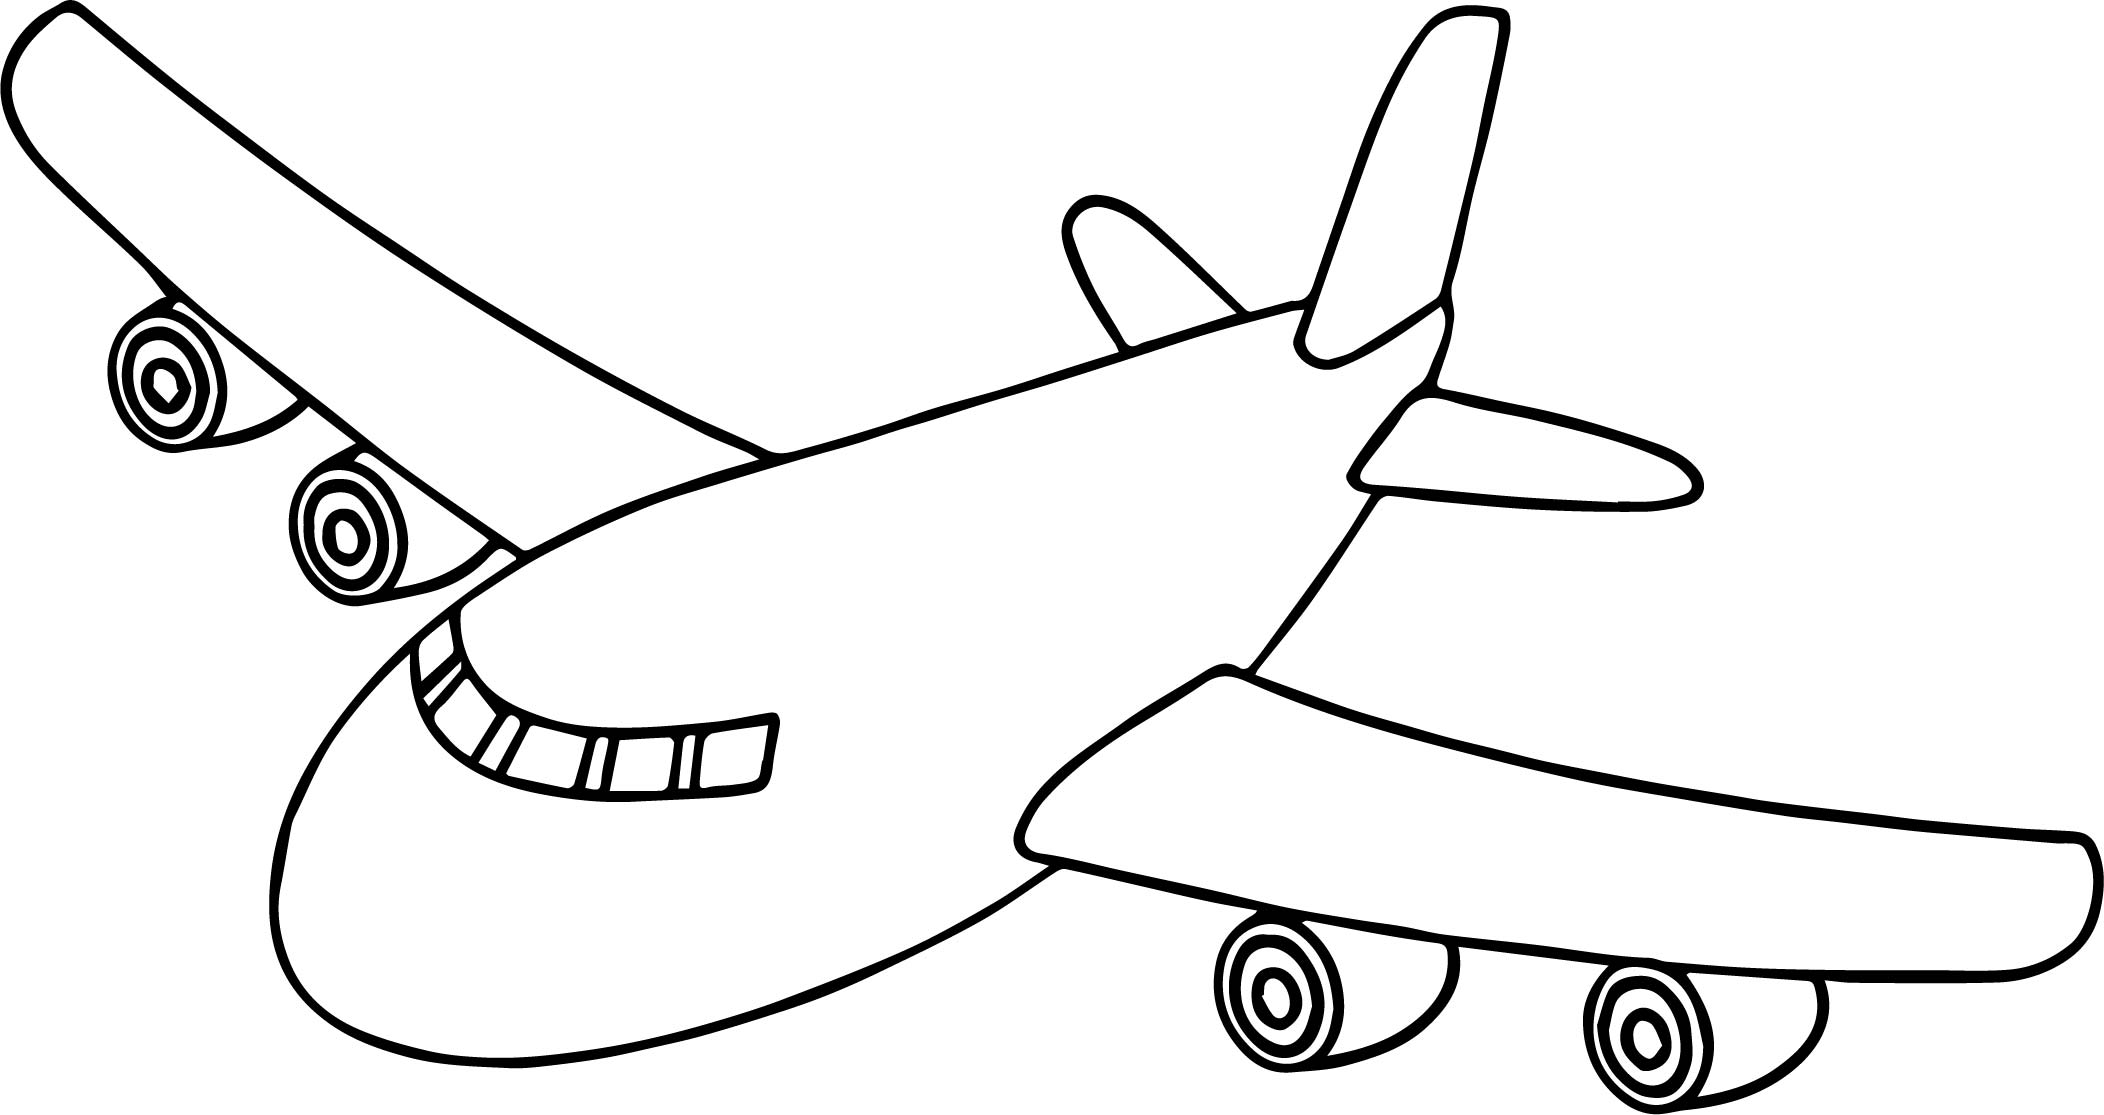 airplane outline drawing at getdrawings free download - 10 free ...